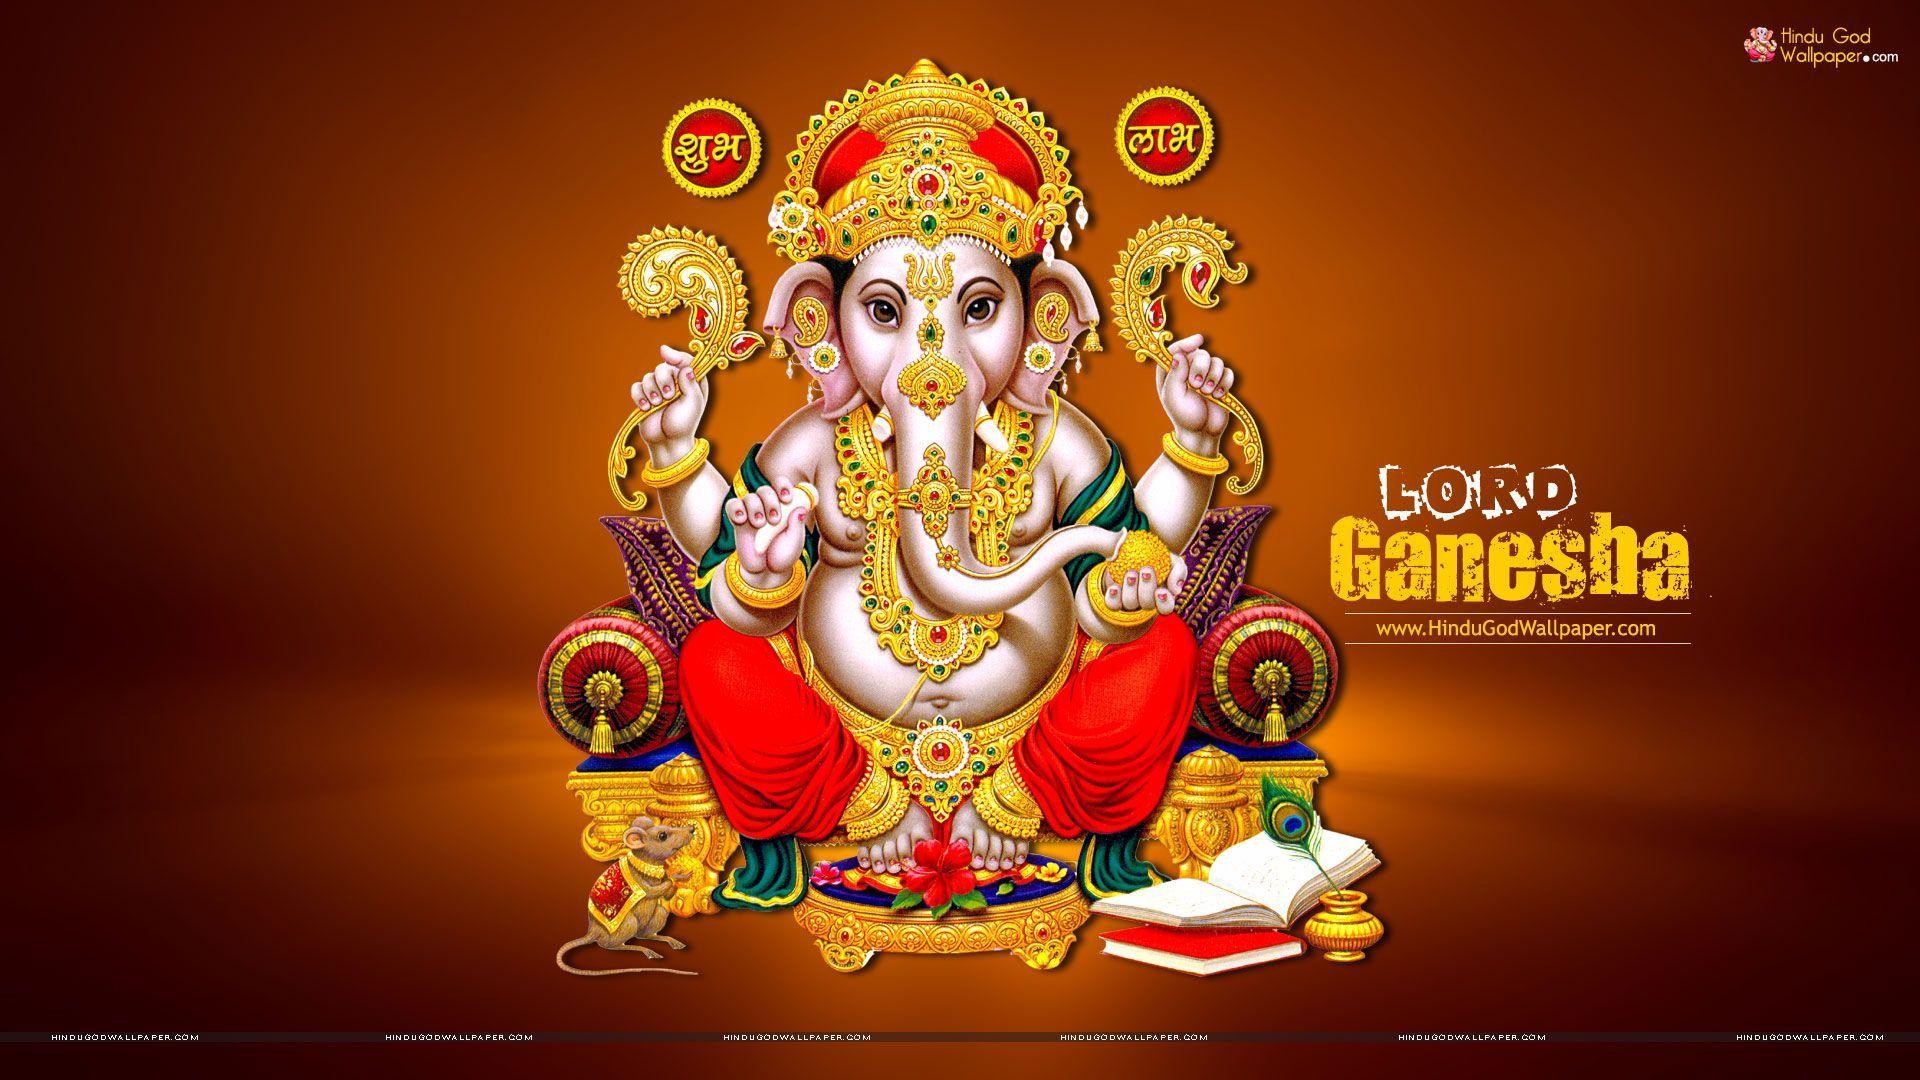 Lord Ganesha Wallpapers - Top Free Lord Ganesha Backgrounds ...